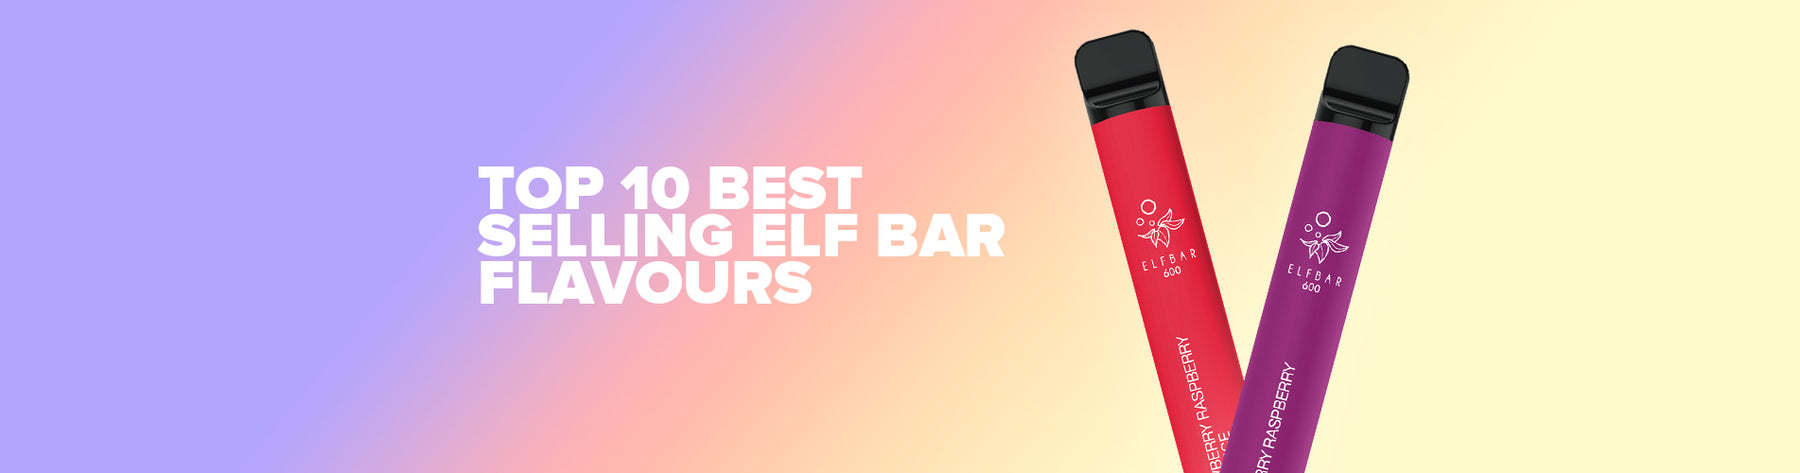 Top 10 Best Selling Elf Bar Flavours